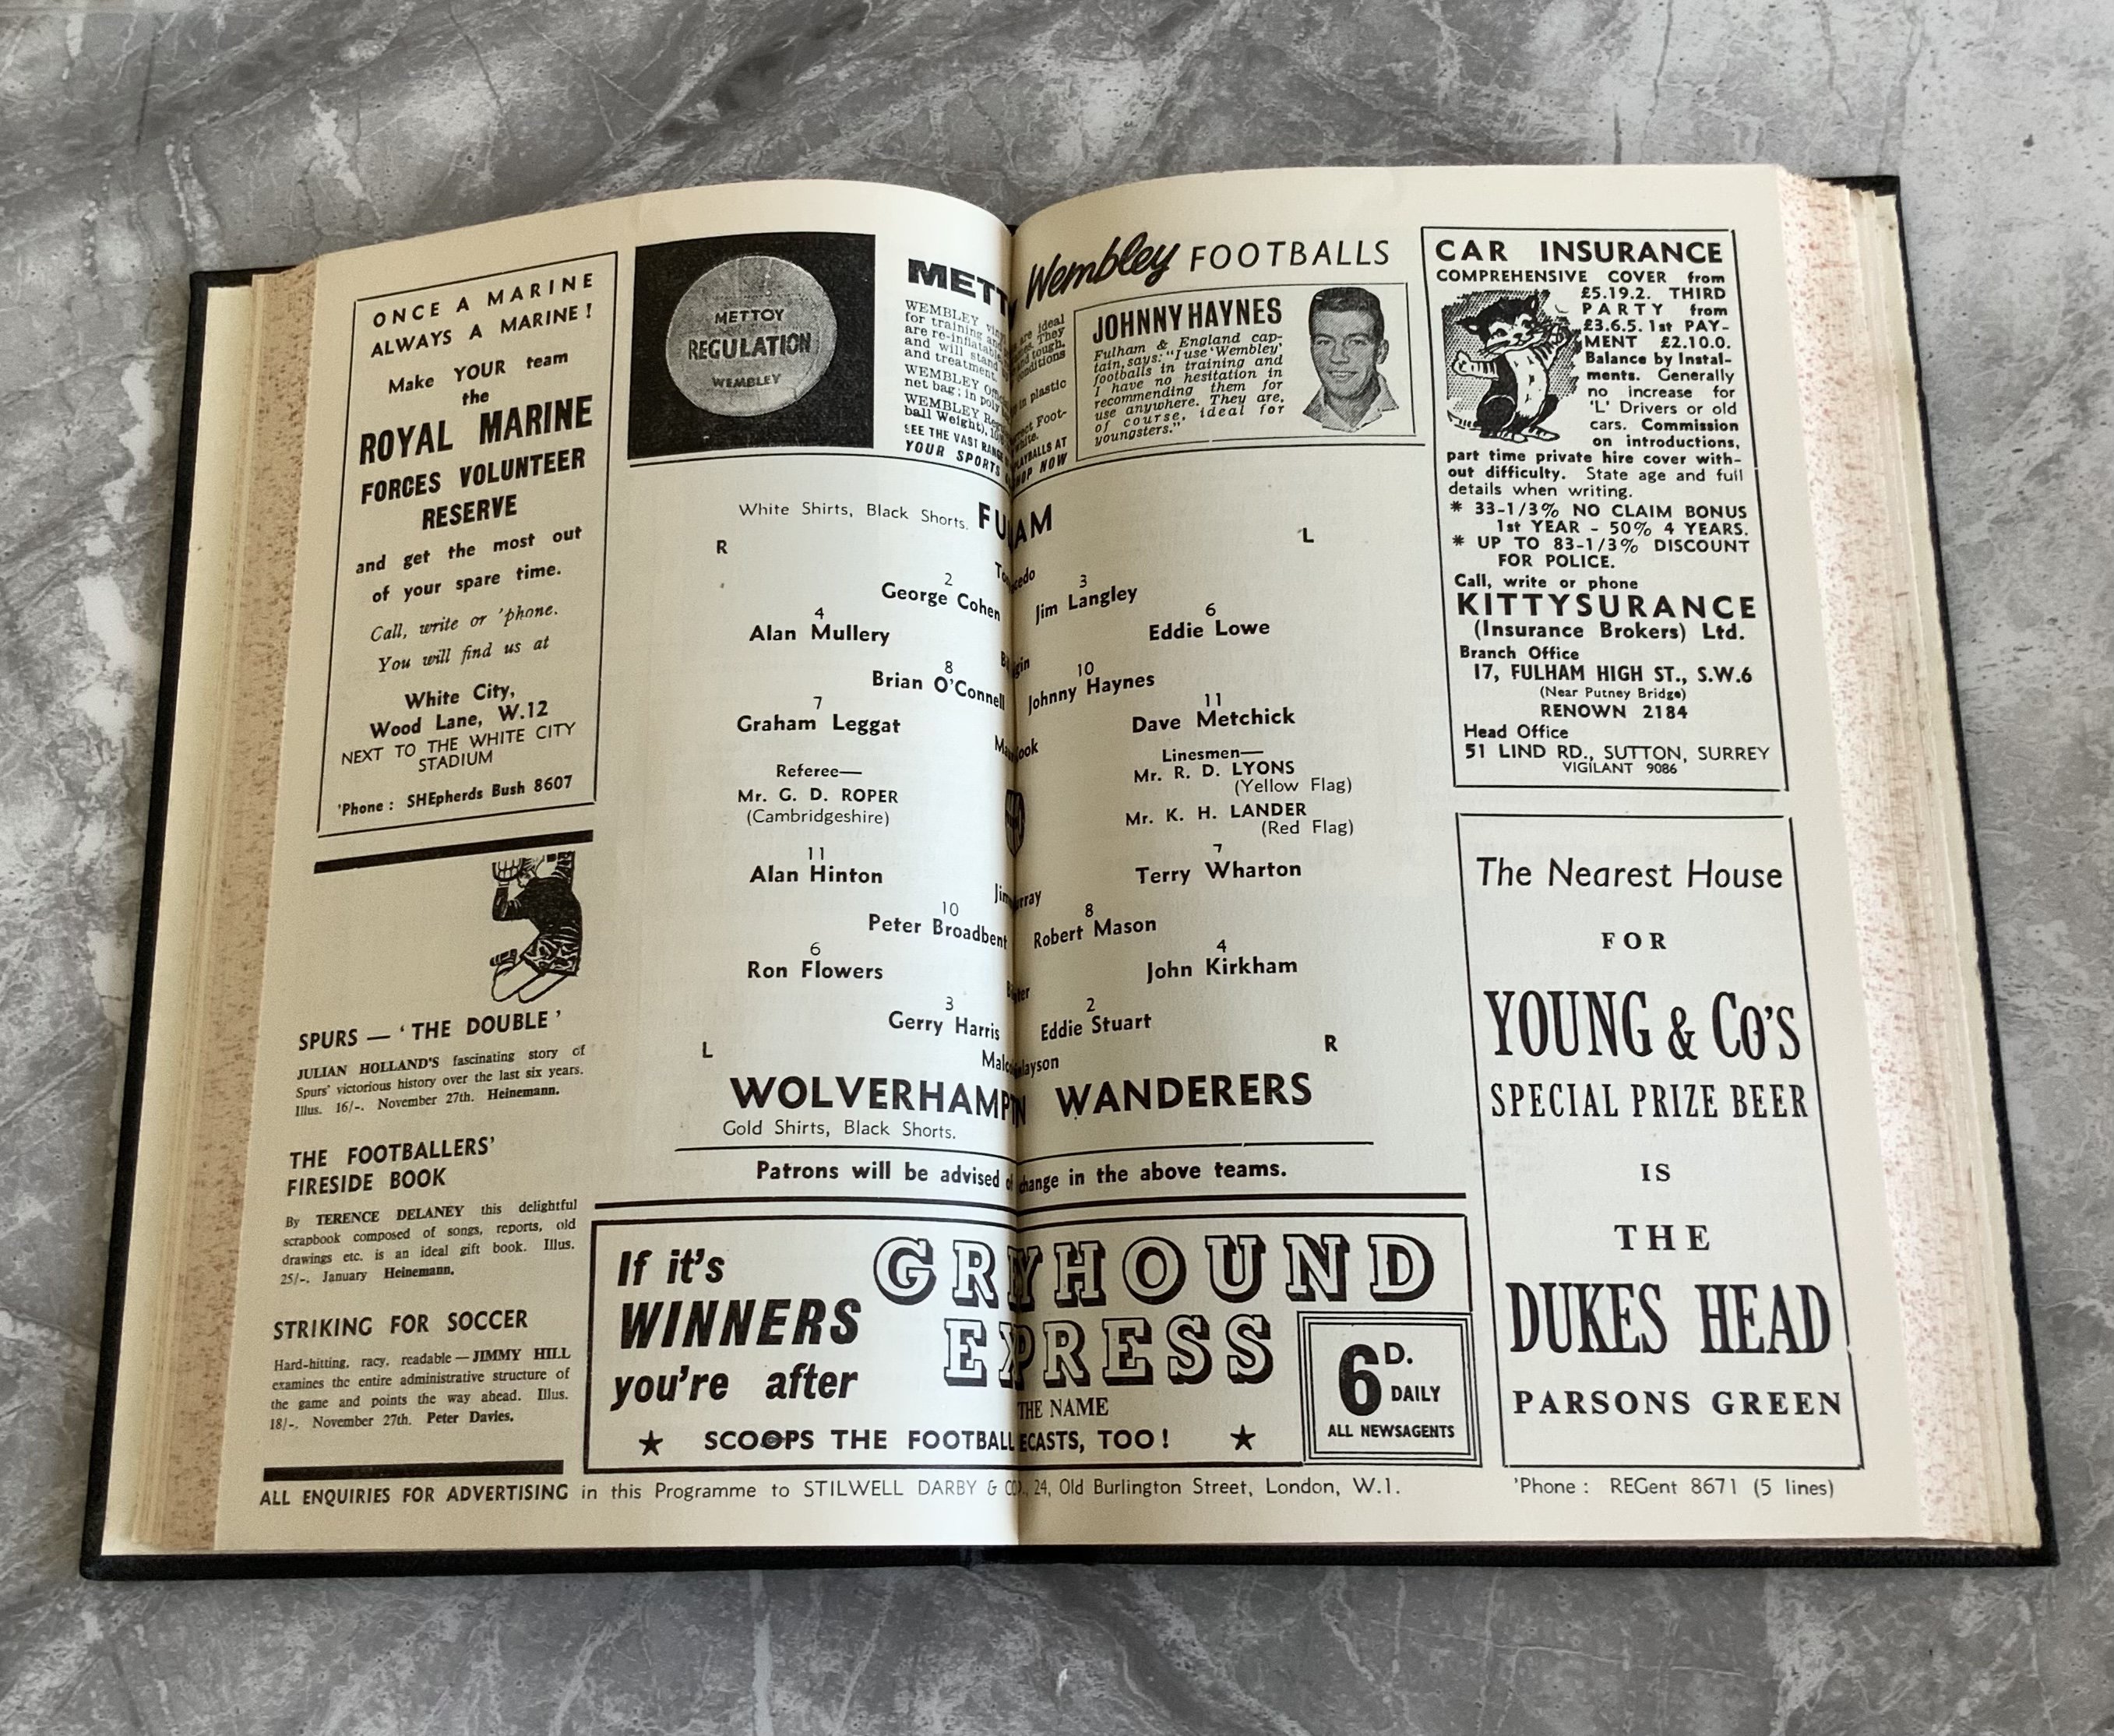 61/62 Fulham Bound Volume Of Football Programmes: 1st team without covers, in excellent condition. - Image 2 of 2